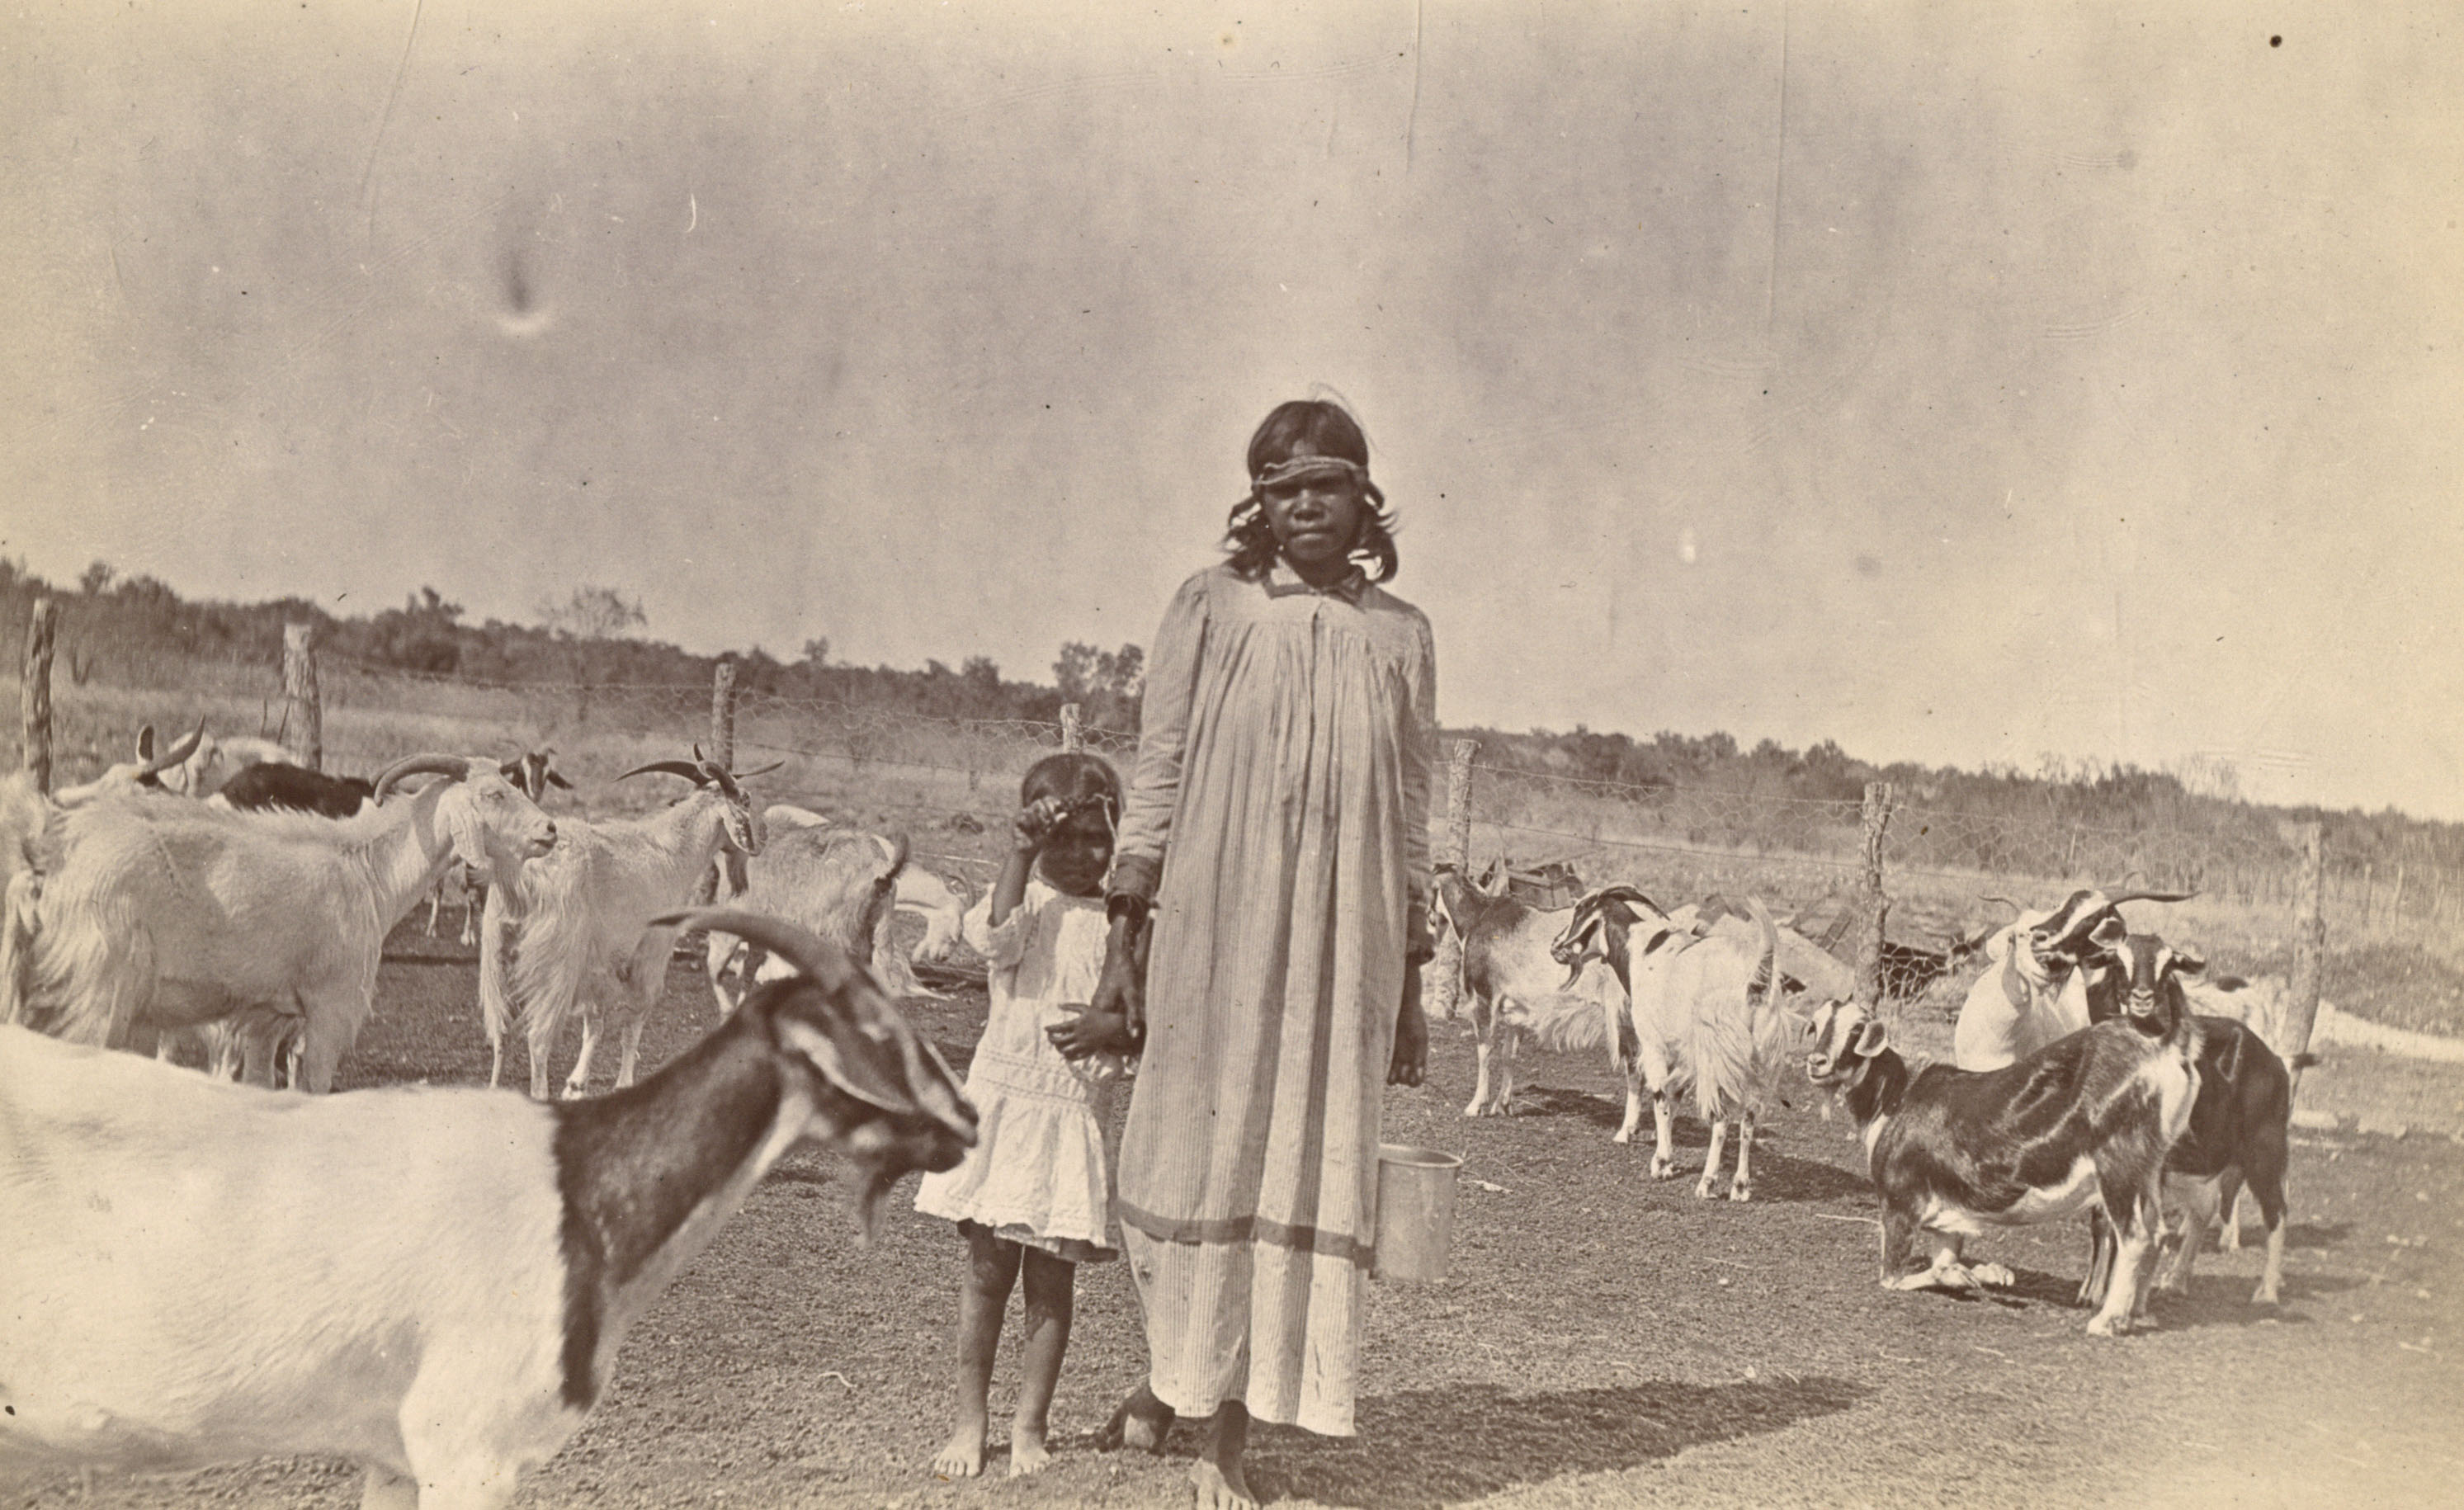 Aboriginal milkmaid with goats, Headingly Station, Queensland, c. 1920s (K1809).